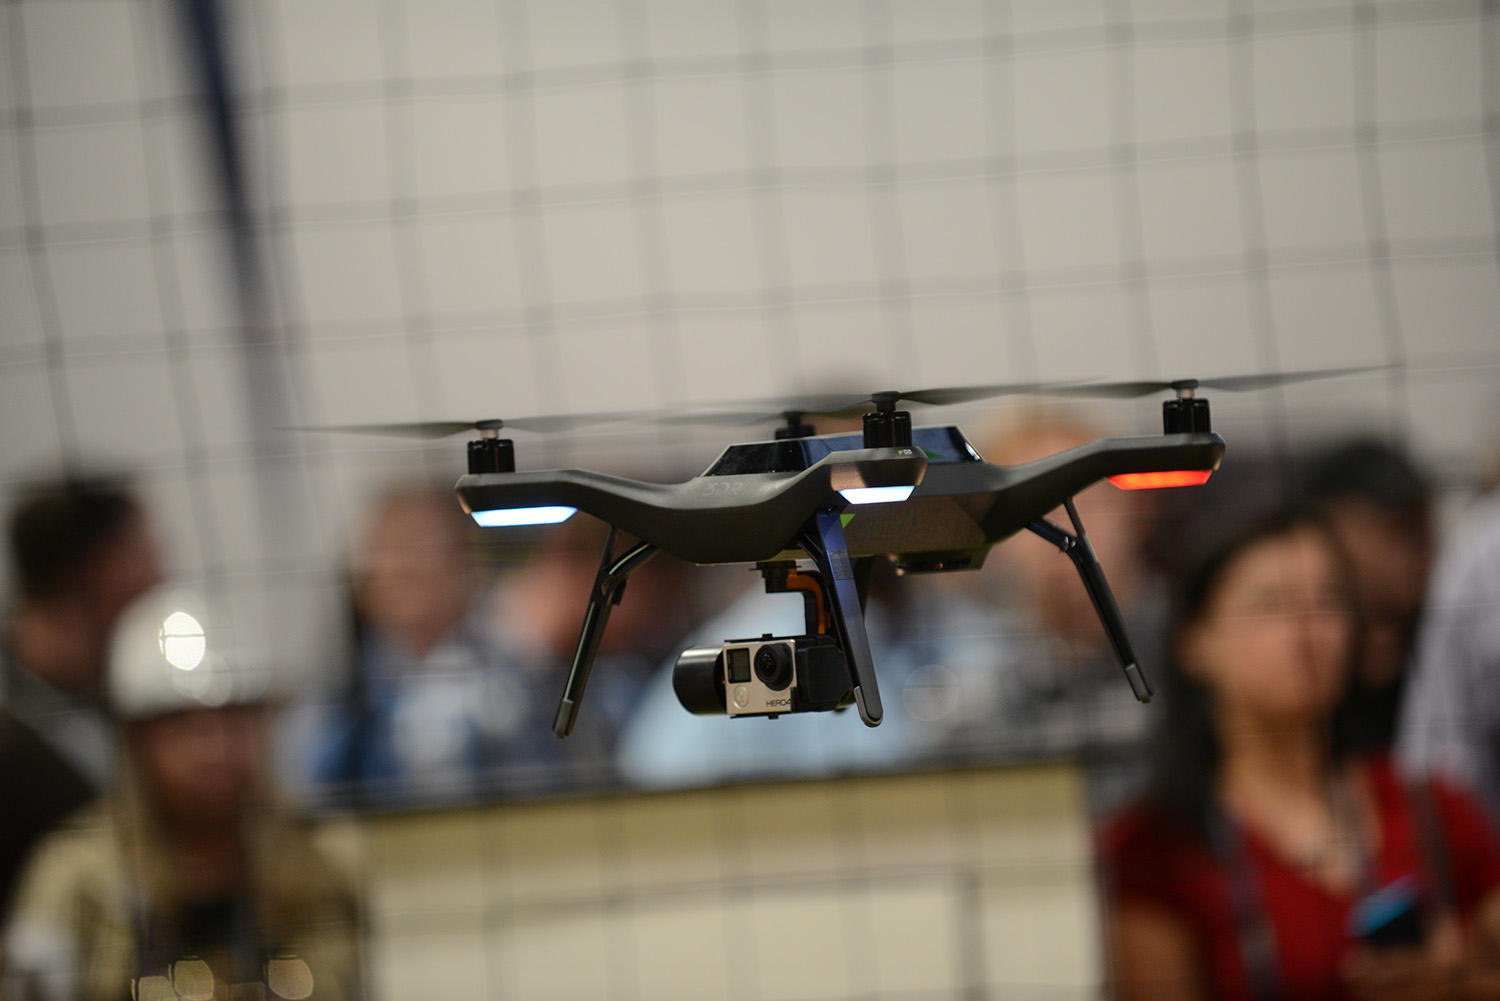 Many companies were demonstrating drone technology